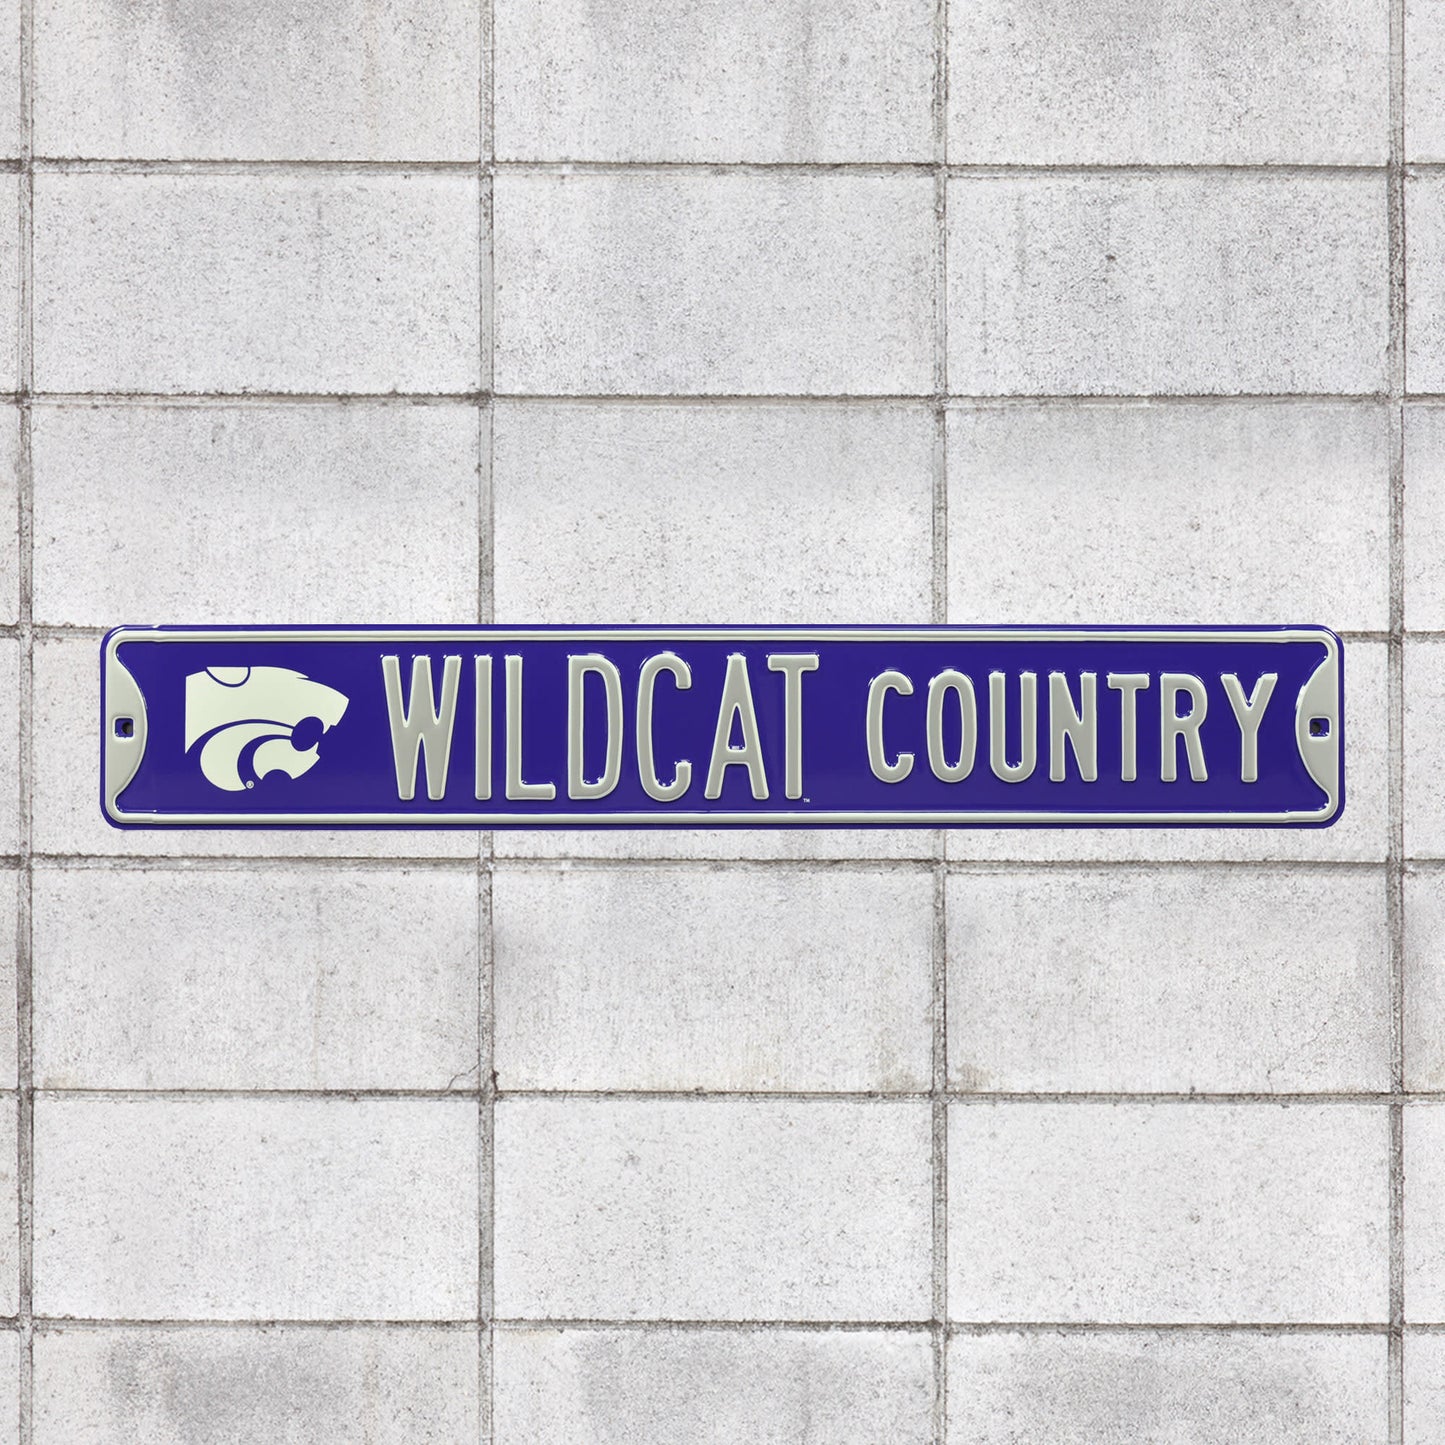 Kansas State Wildcats: Wildcat Country - Officially Licensed Metal Street Sign